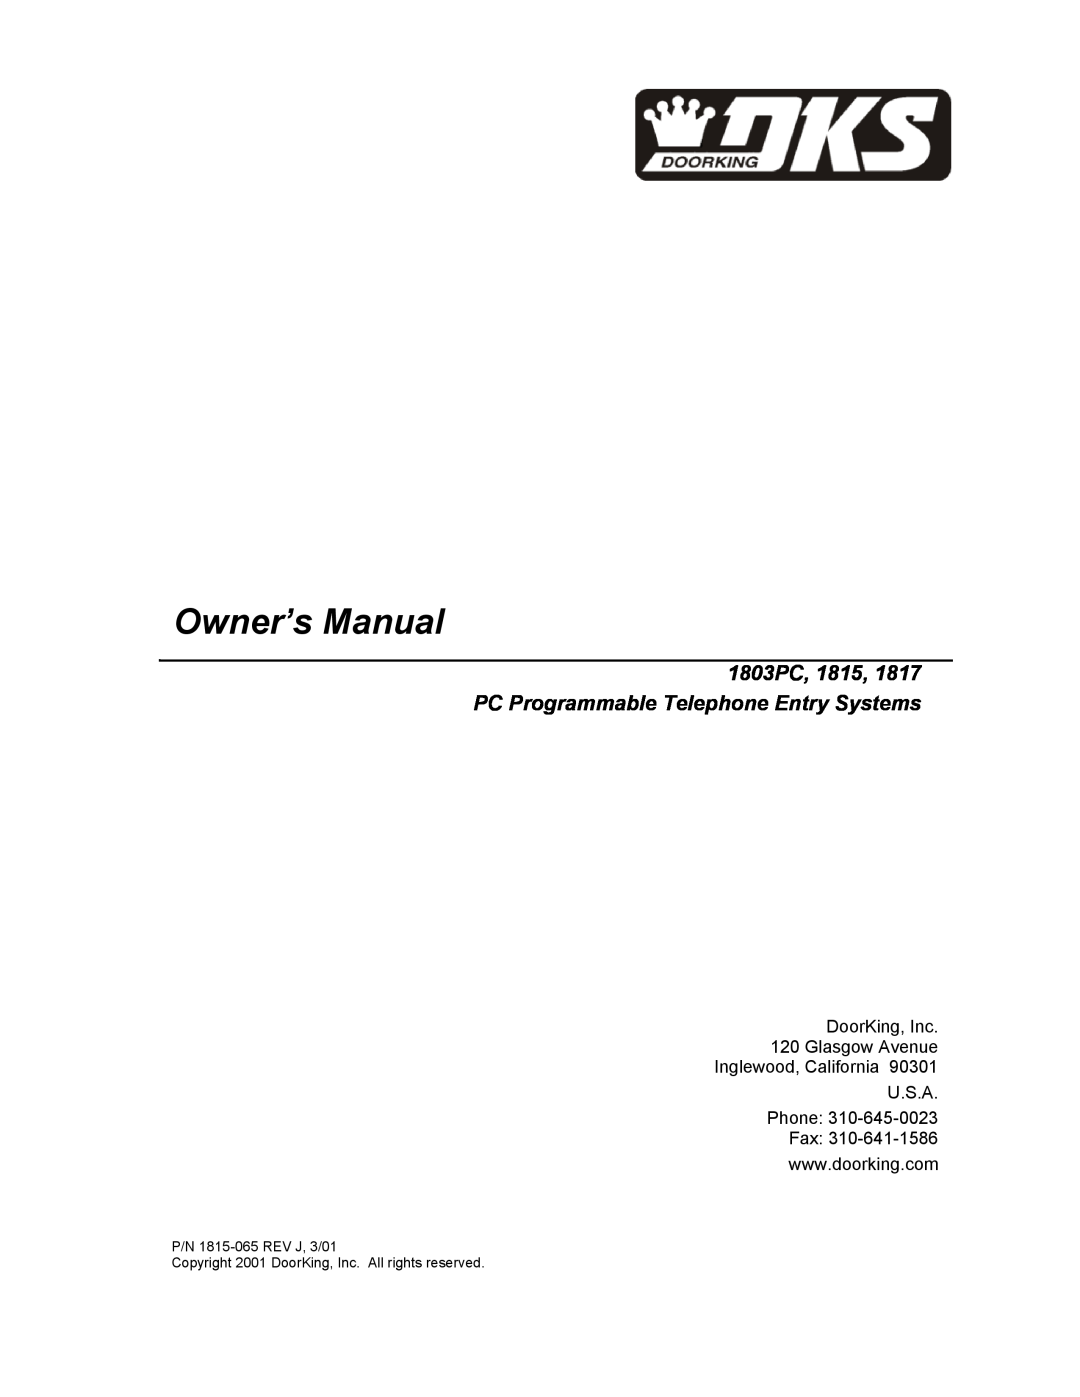 DKS Enterprises owner manual Owner’s Manual, 1803PC, 1815, 1817 PC Programmable Telephone Entry Systems 